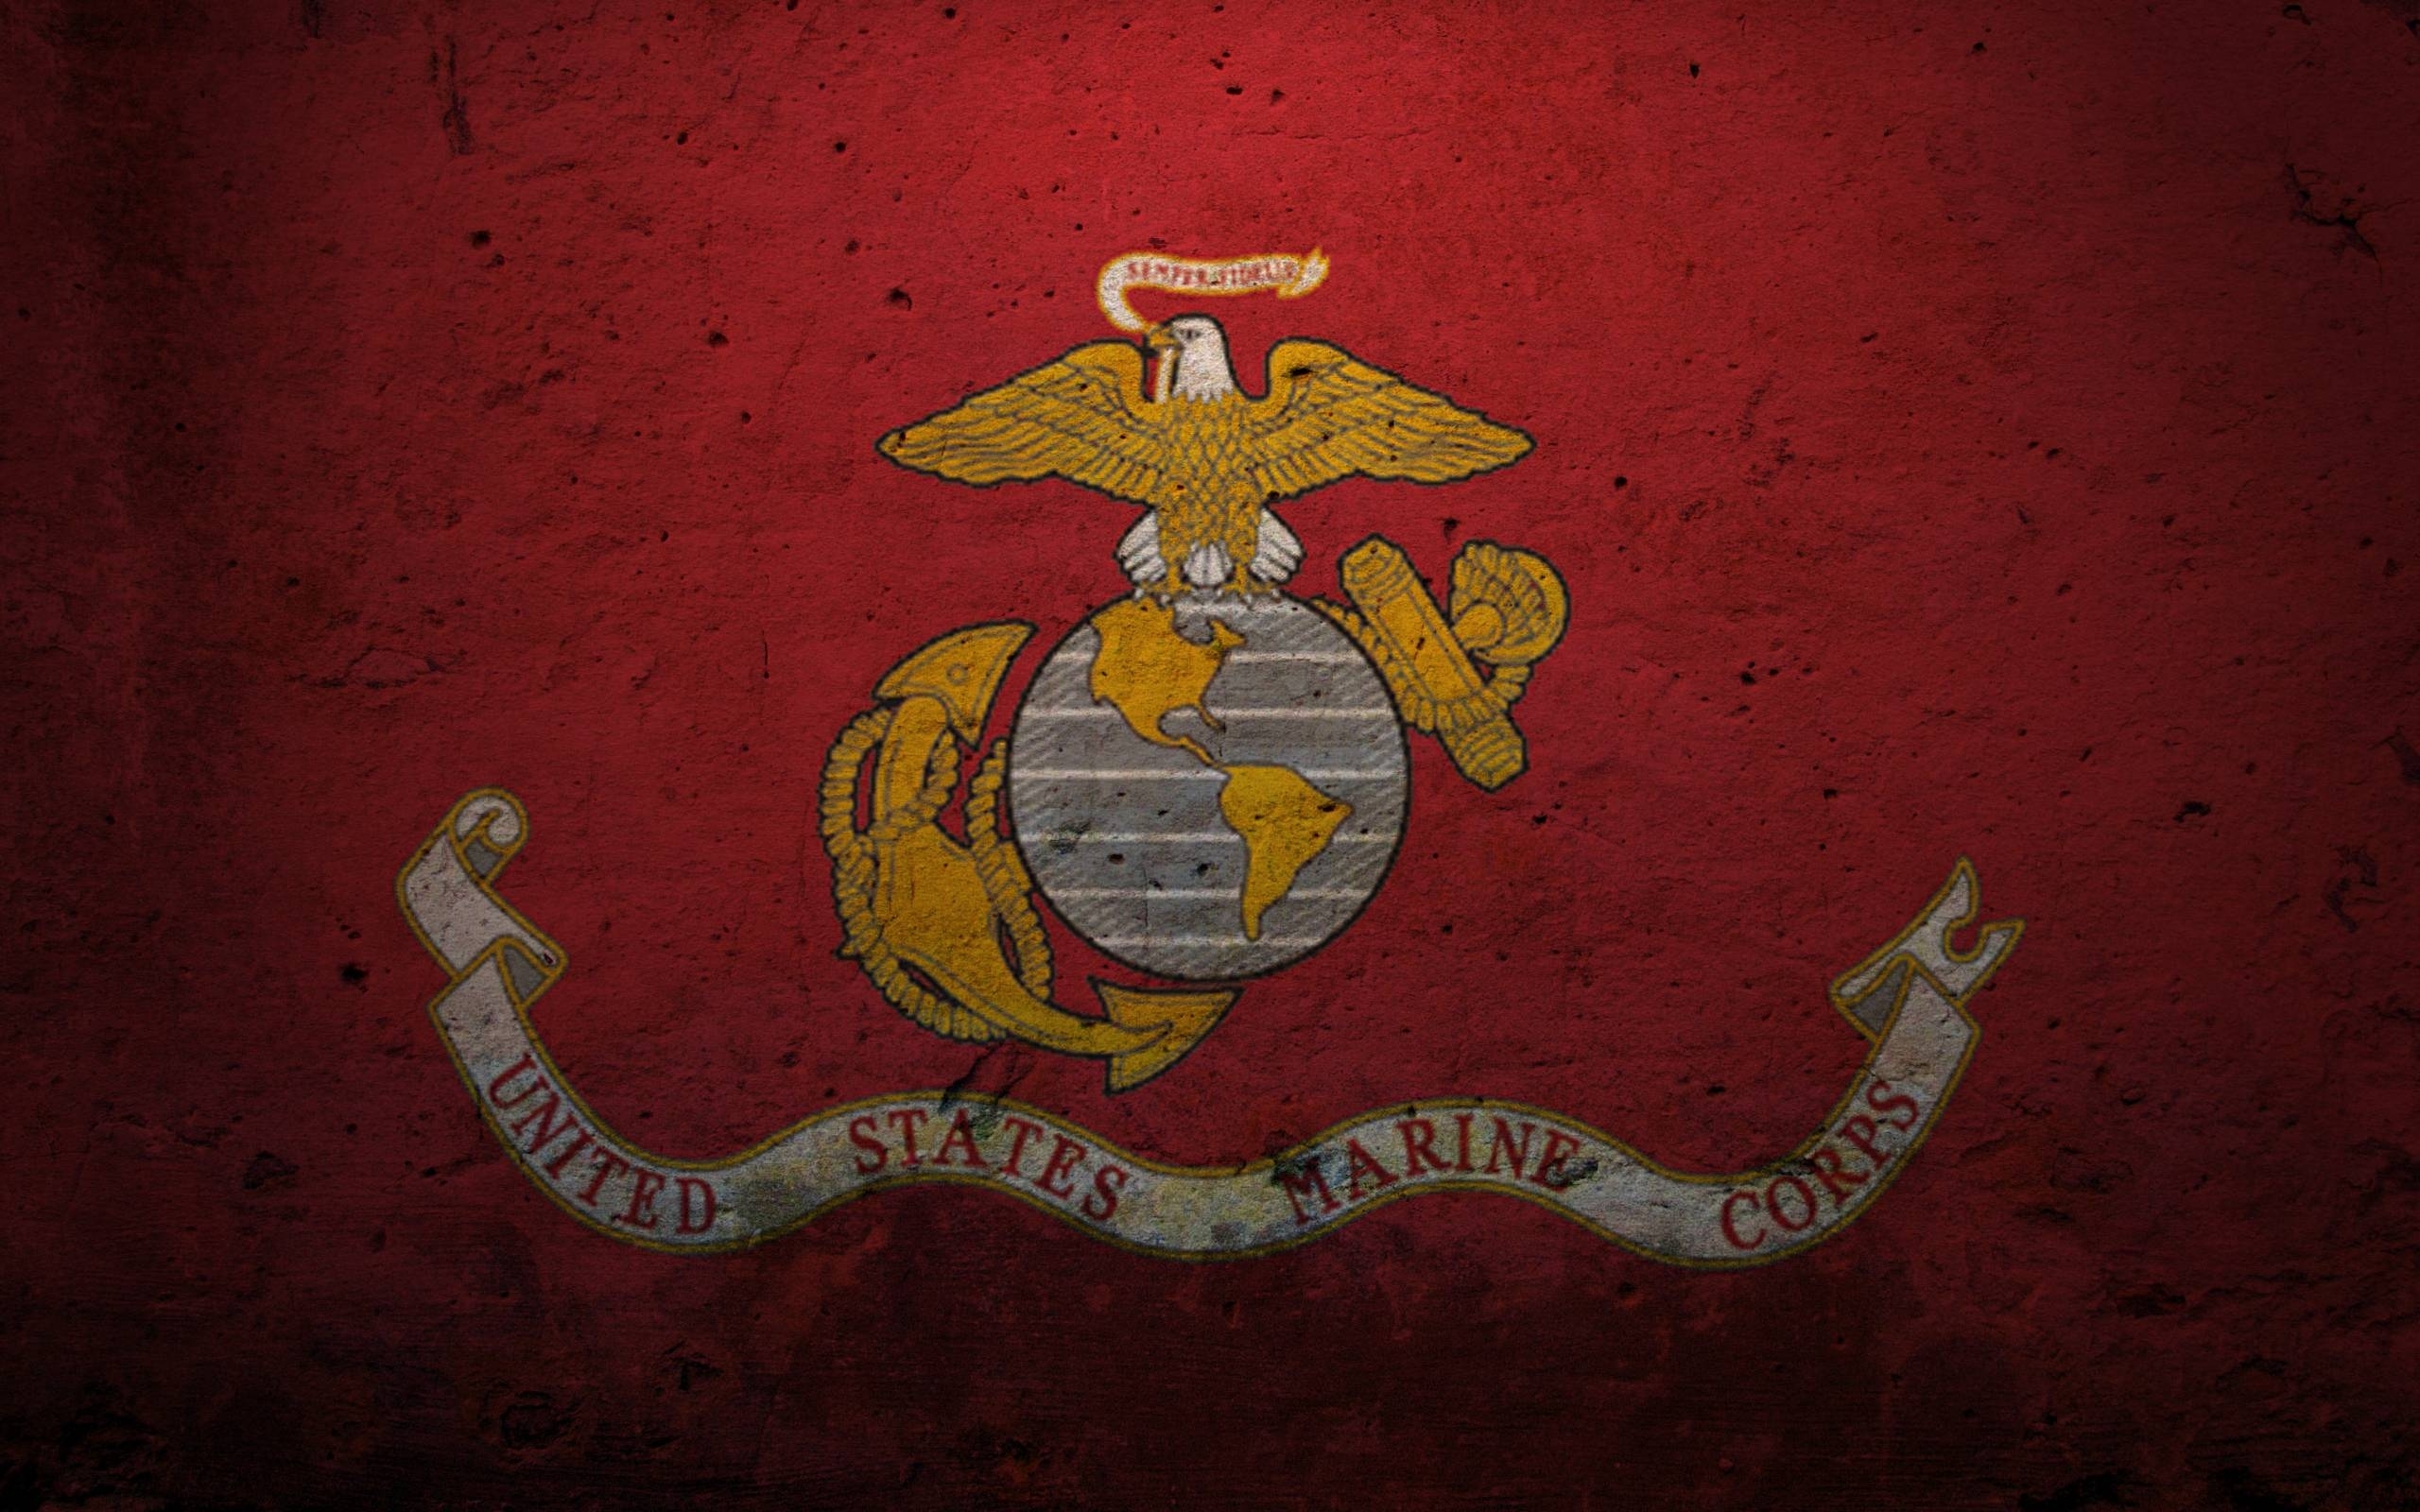 10 Top Marine Corps Wallpaper For Android FULL HD 1920×1080 For PC Desktop